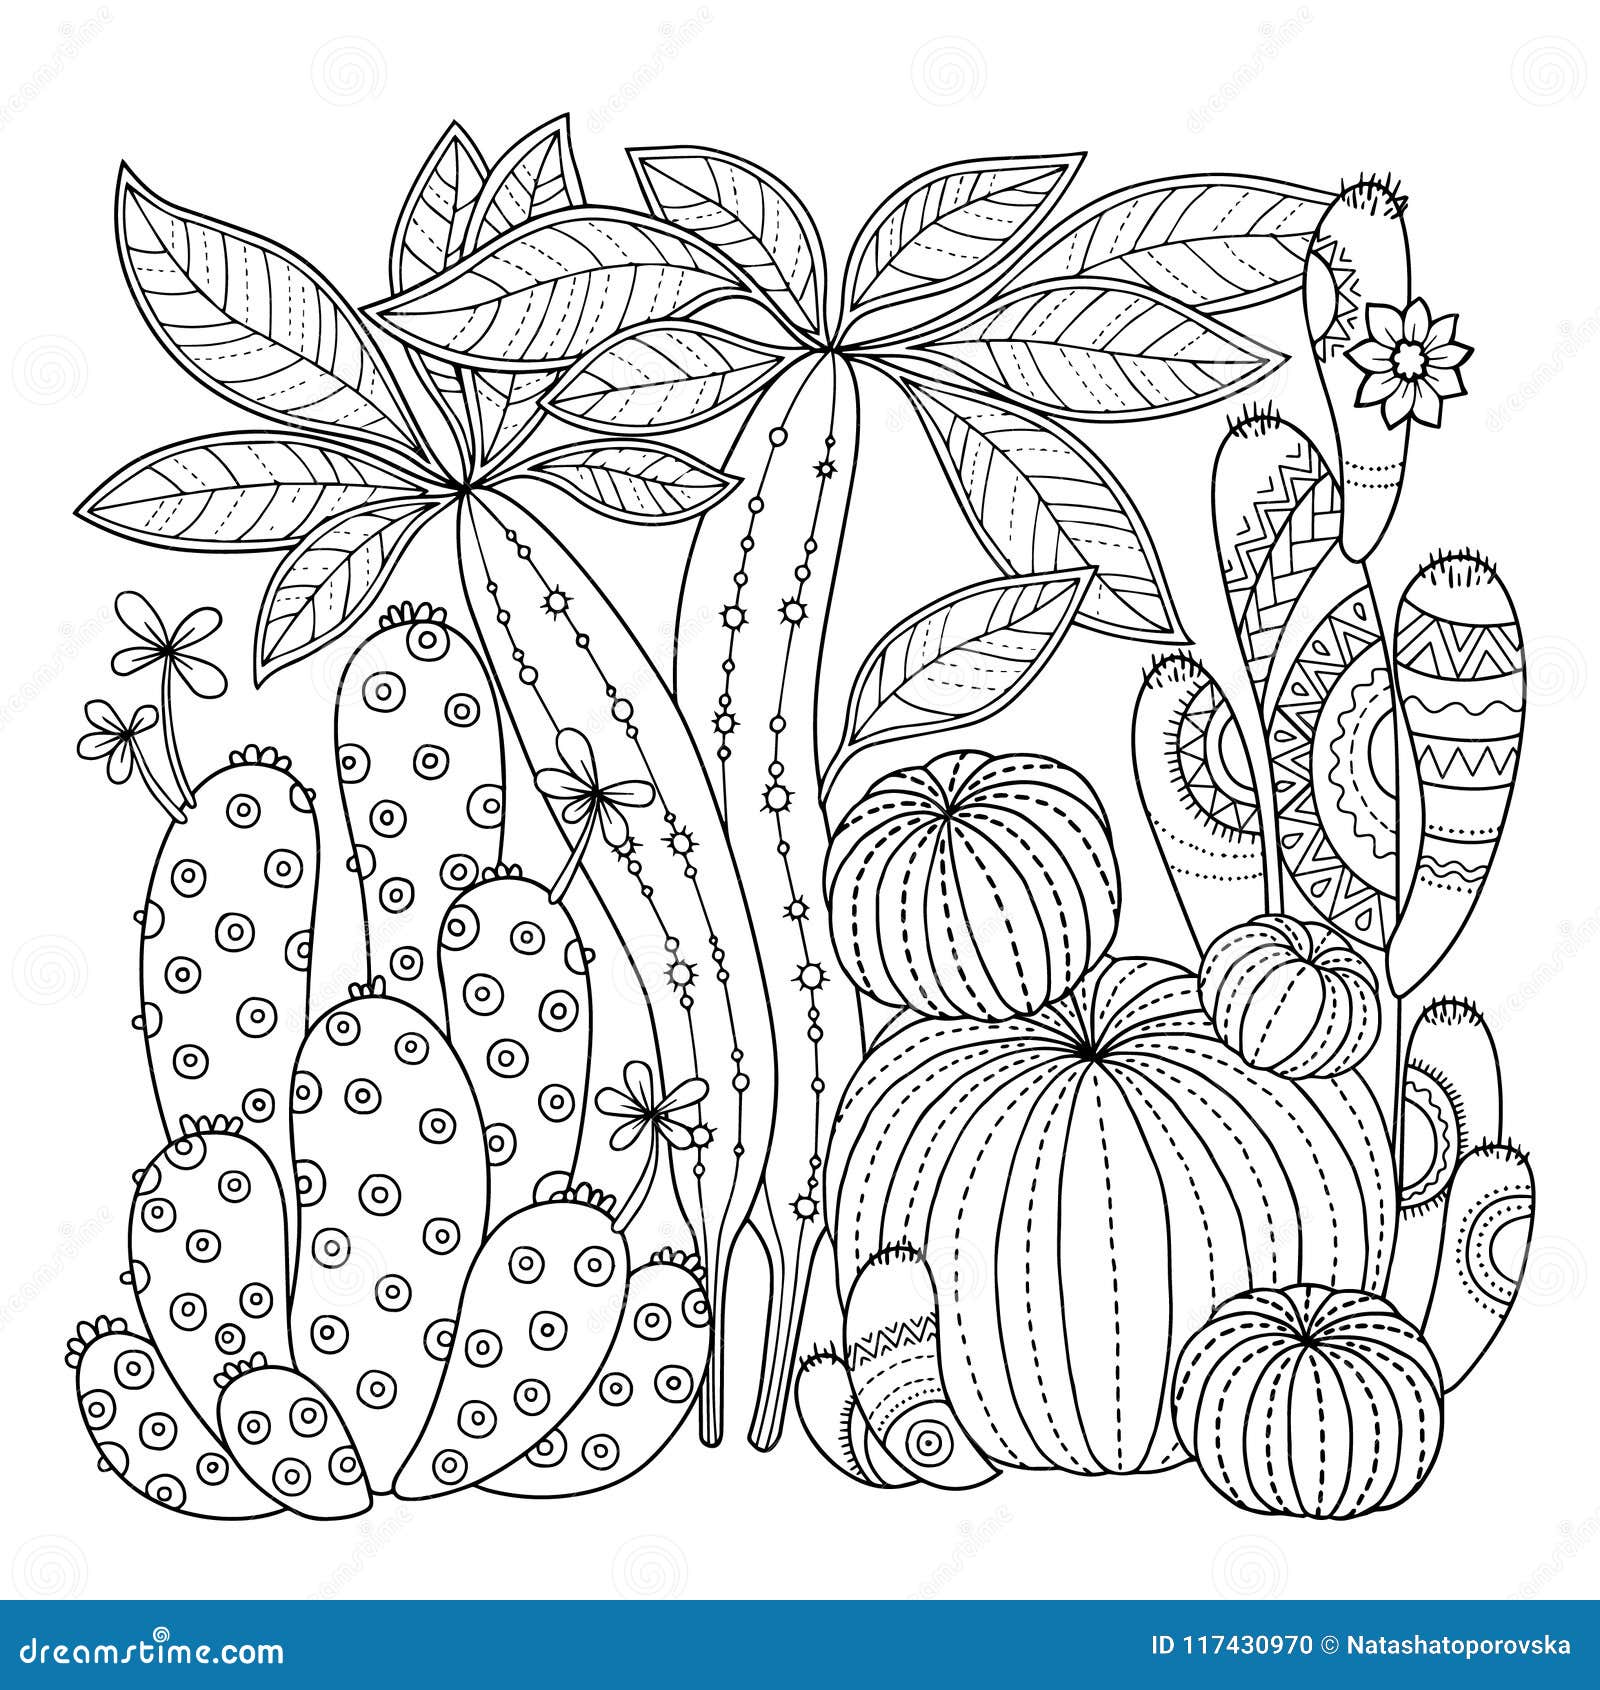 Vector Coloring Page. Linear Image on White Background Cute Cactus ...